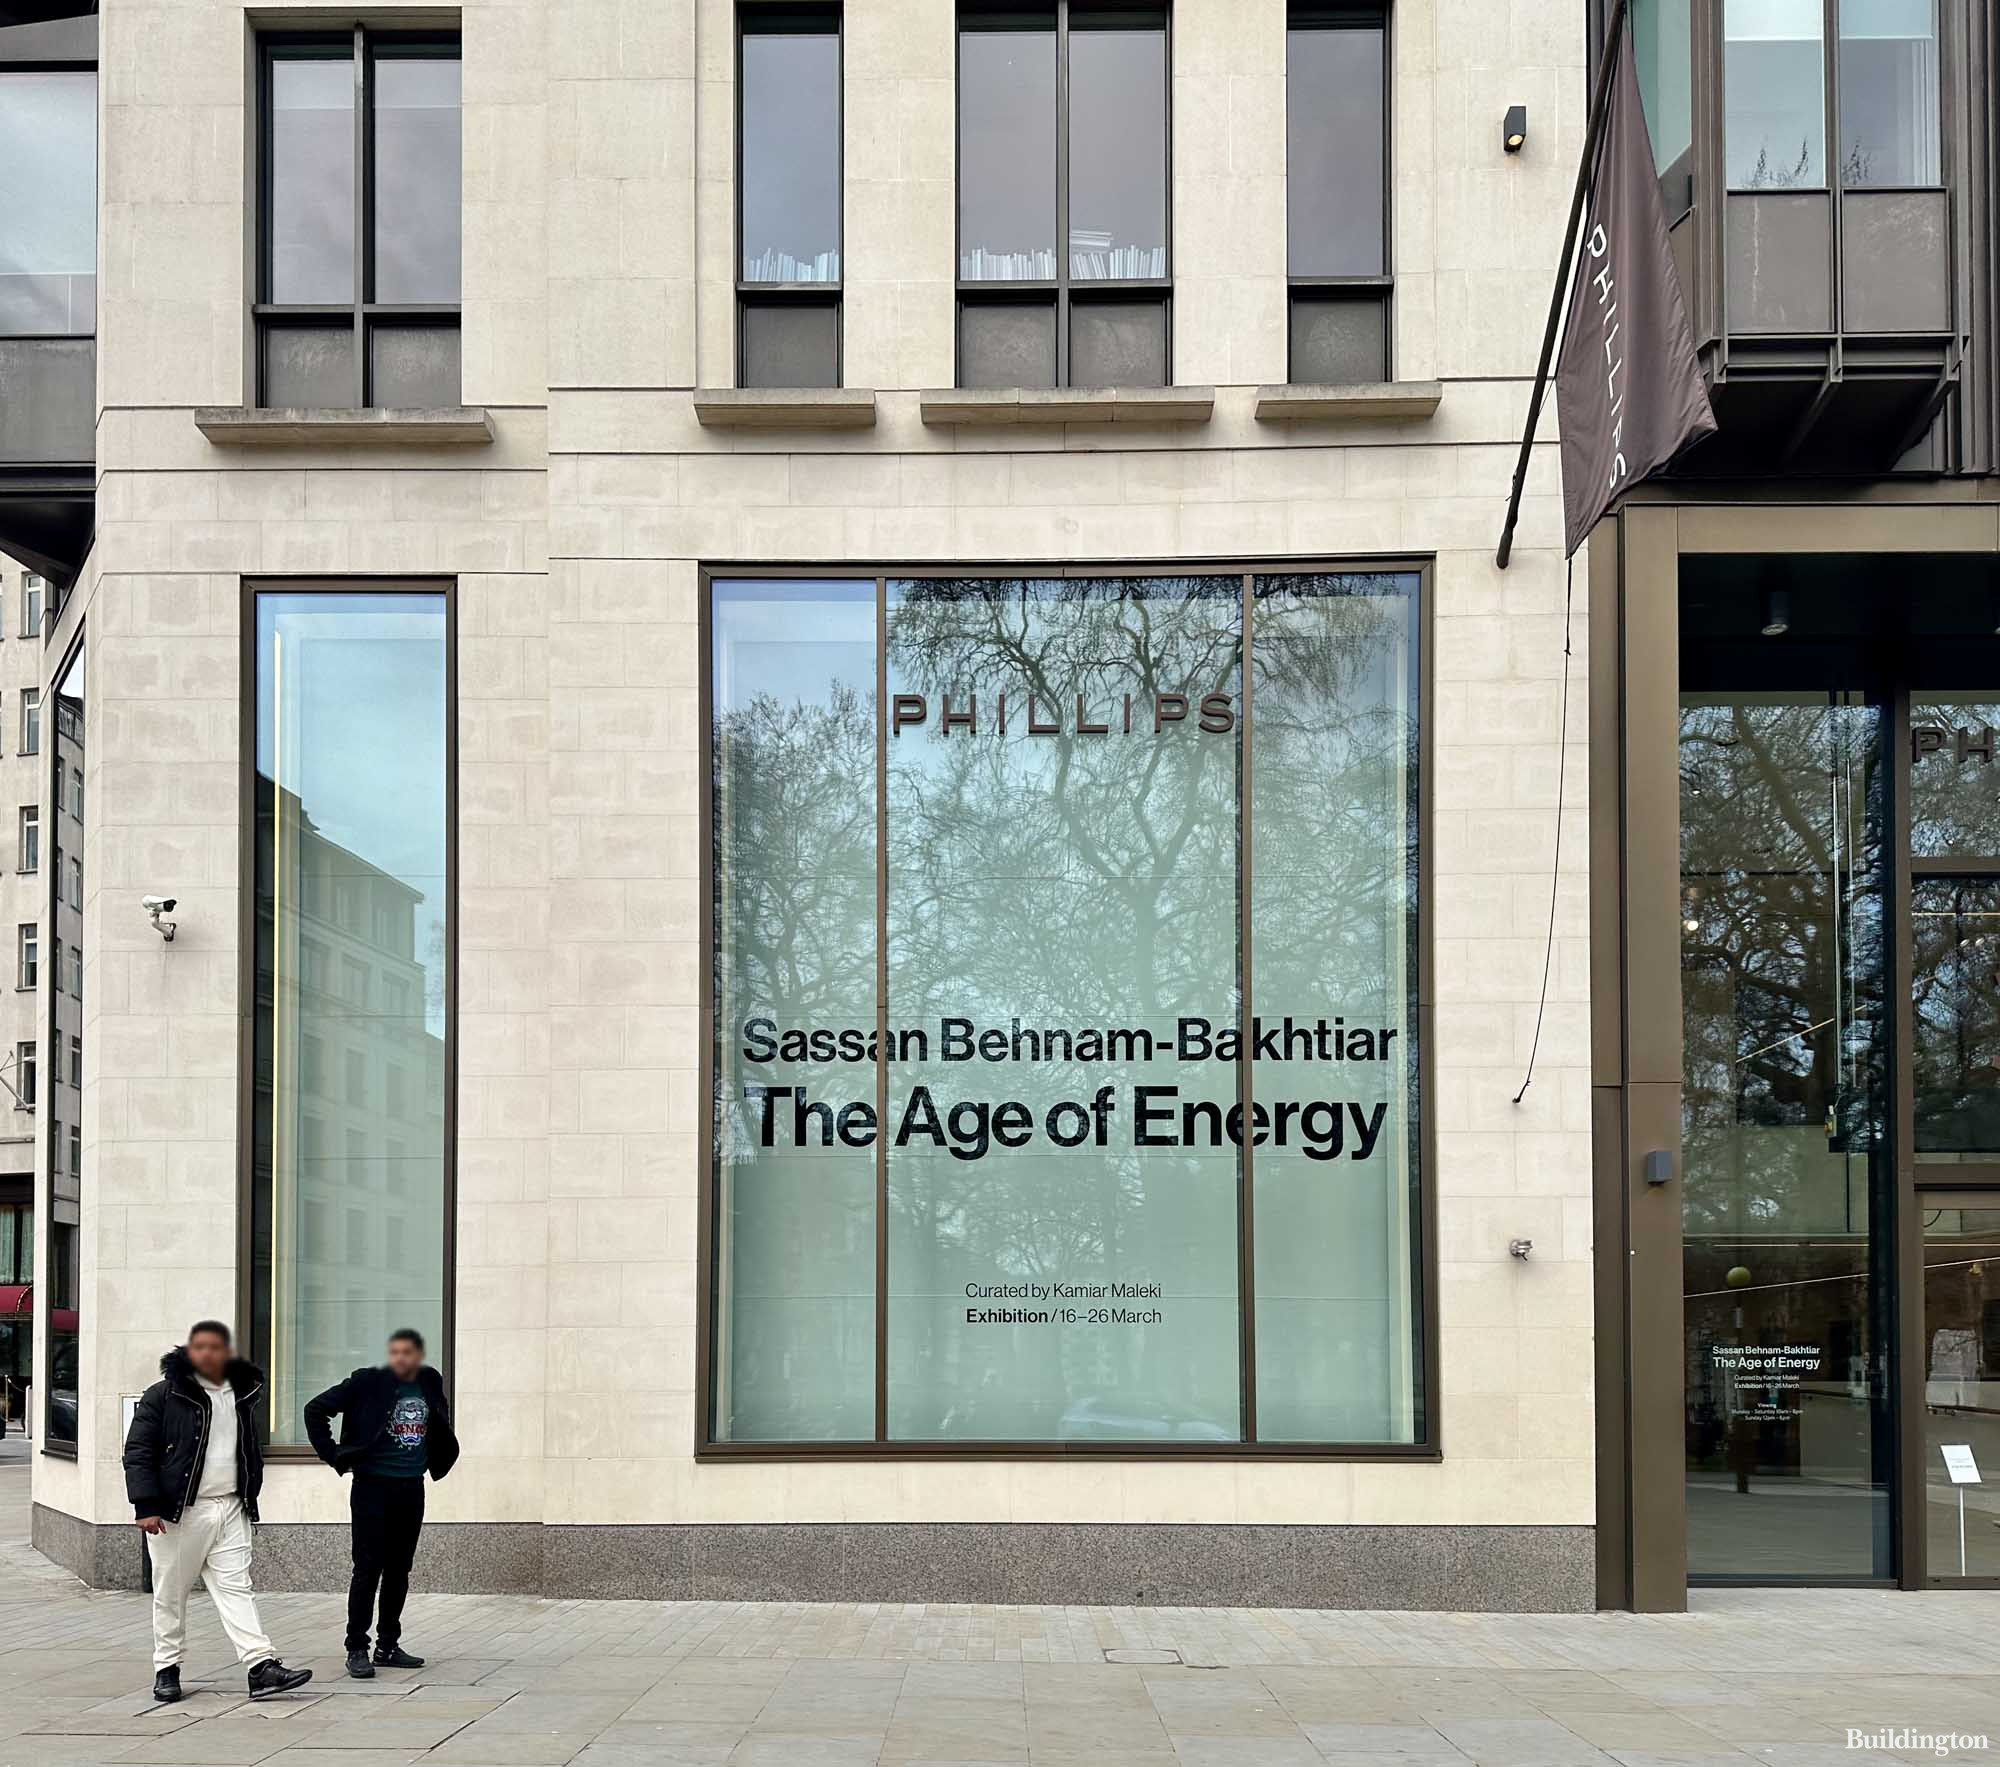 The Age of Energy by Sassam Benham-Baktiar in Phillips auction house at 30 Berkeley Square building in Mayfair, London W1.